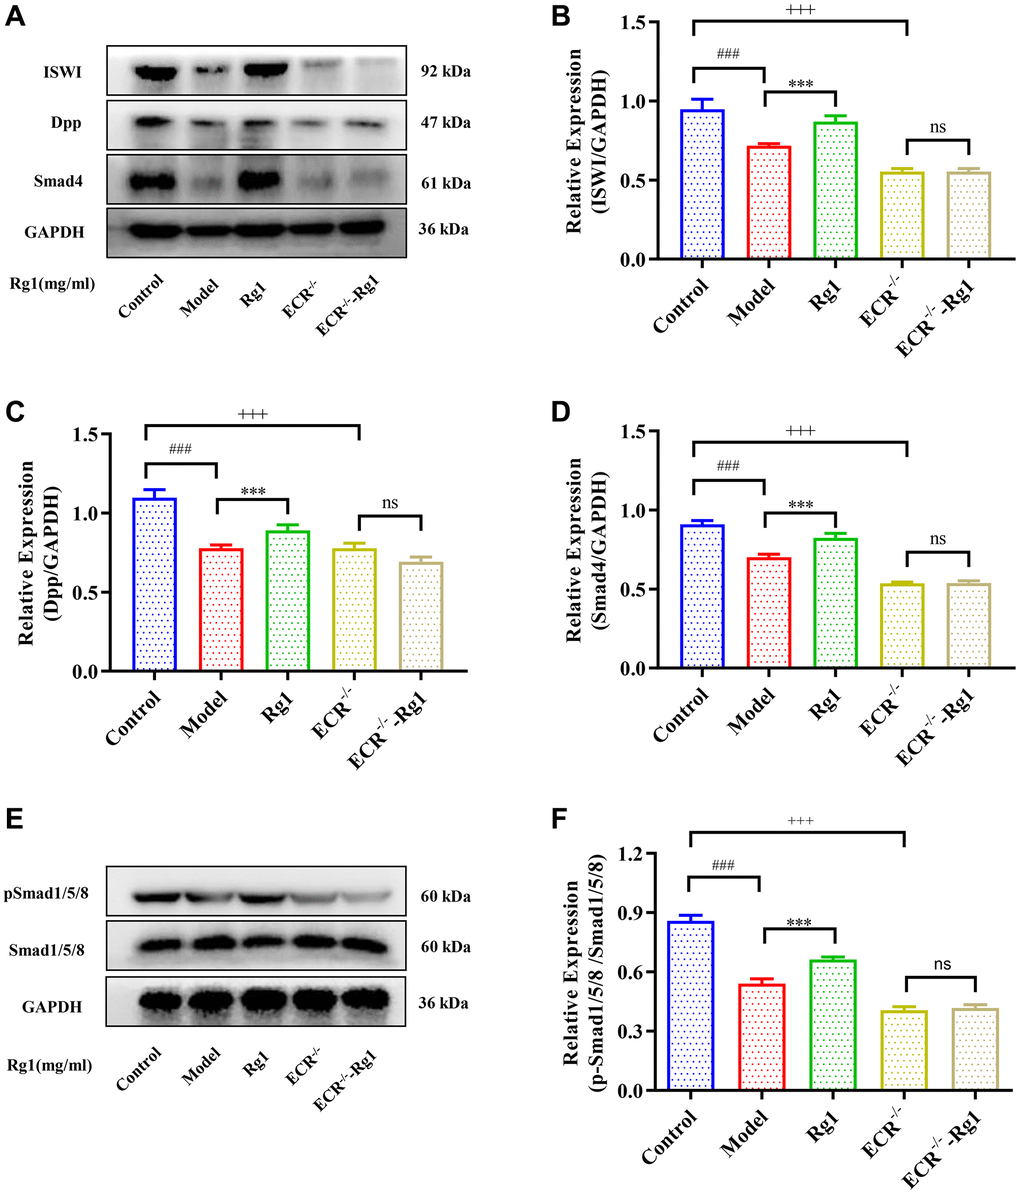 Effect of ginsenoside Rg1 on niche ECR/BMP signaling in Drosophila. (A) Western blotting analysis of expression of ISWI, Decapentaplegic (Dpp) and Smad4; (B) Relative expression levels of ISWI; (C) Relative expression levels of Dpp; (D) Relative expression levels of Smad4; (E) Western blotting analysis of expression of pSmad1/5/8; (F) Relative pSmad1/5/8 expression levels; GAPDH antibody was used as loading Control. Results were analysed with one-way ANOVA. Data are shown as the mean ± SD (n = 100); ###p Drosophila); ***p Drosophila); +++p Drosophila); Abbreviation: ns: no significance.